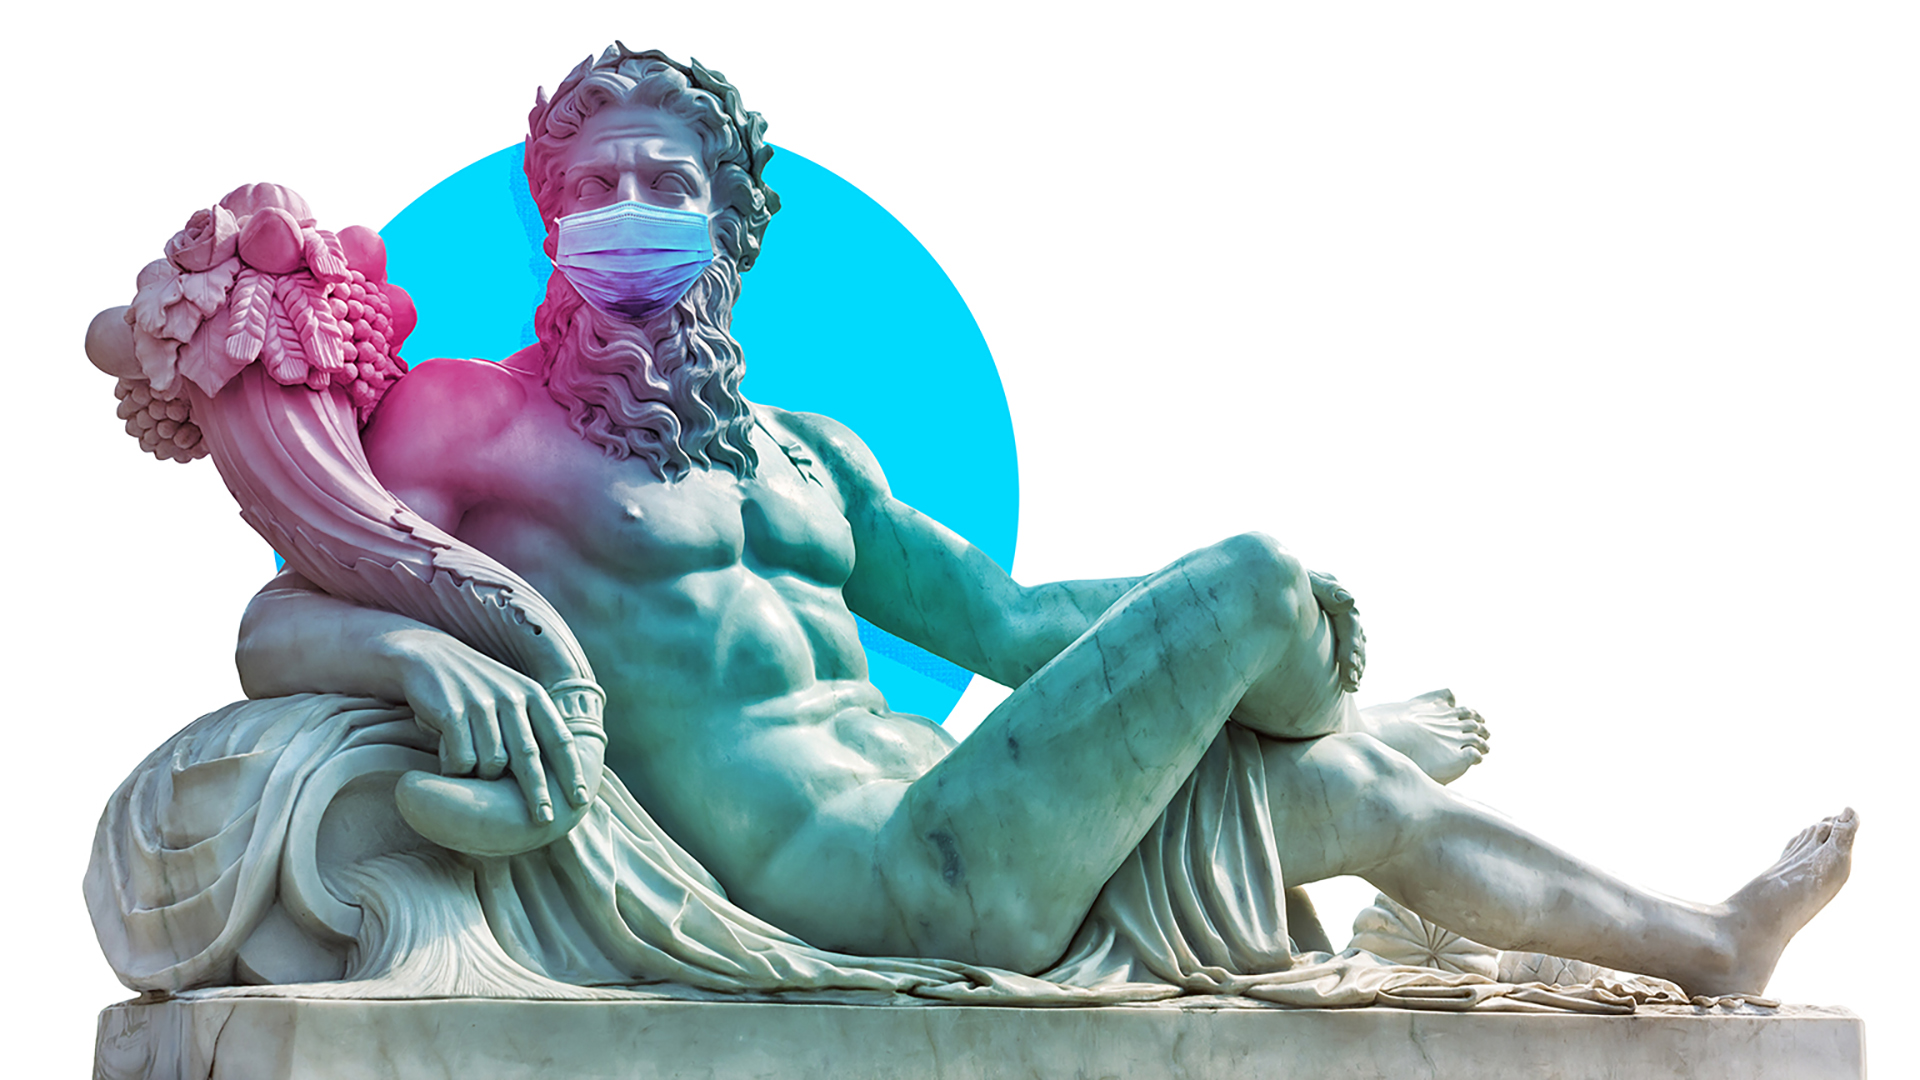 Talking Gods, a digital festival of five reimagined Greek myths takes place on April 5-9 with a modern mythological tale premiering each night, followed by a live Zoom Q&A: Persephone, Orpheus, Pygmalion, Aphrodite and Icarus